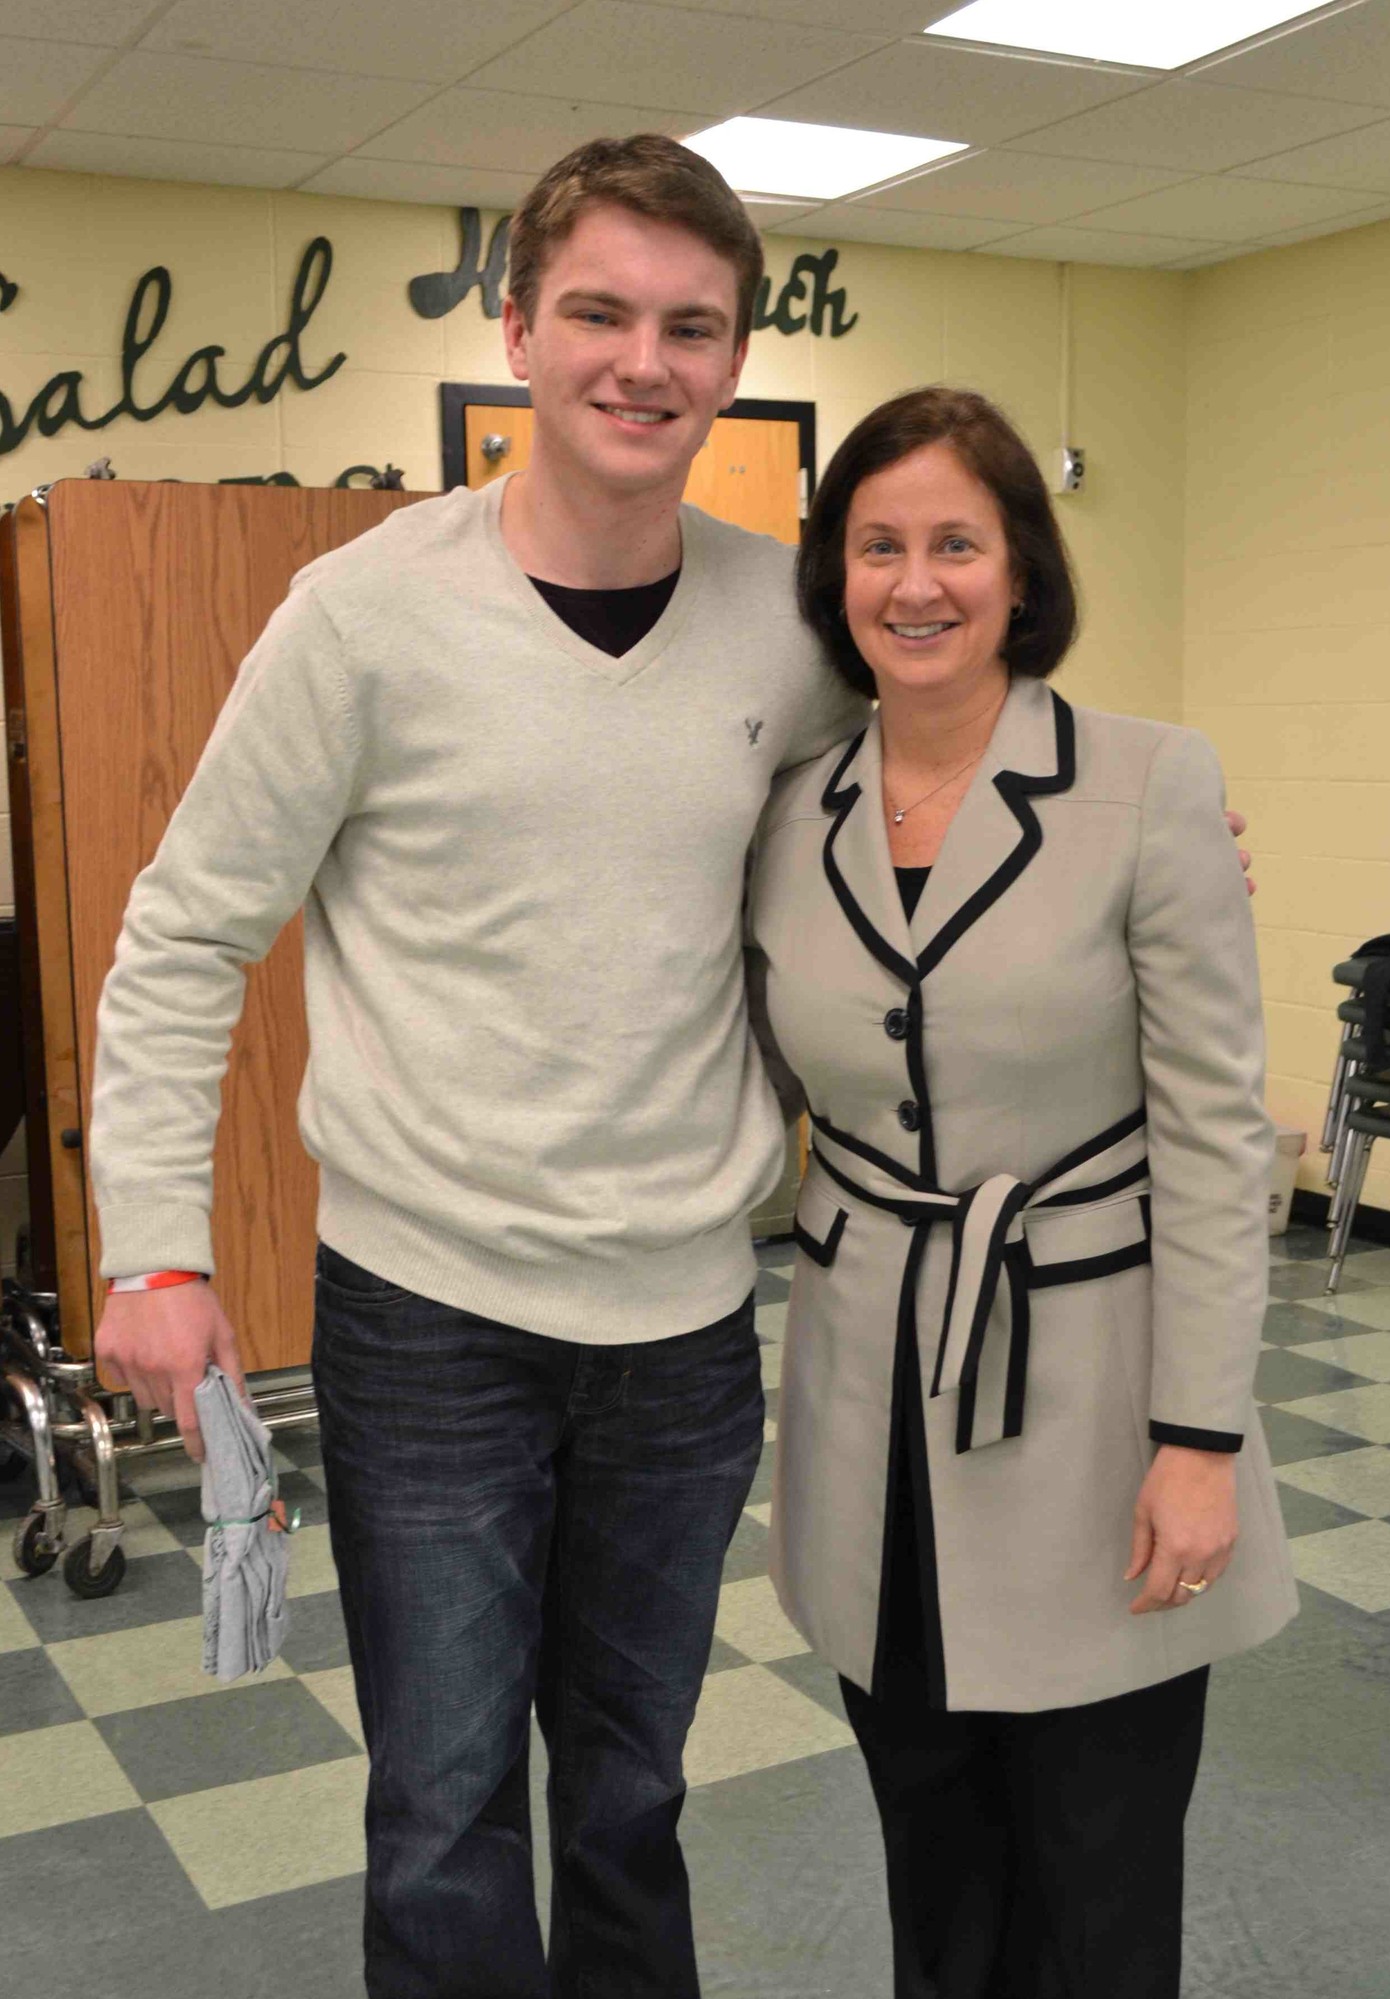 Superintendent of Schools Dr. Melissa Burak commended high school student Ray Mohler for being named 2014 Person of the Year by the Lynbrook/East Rockaway Herald.